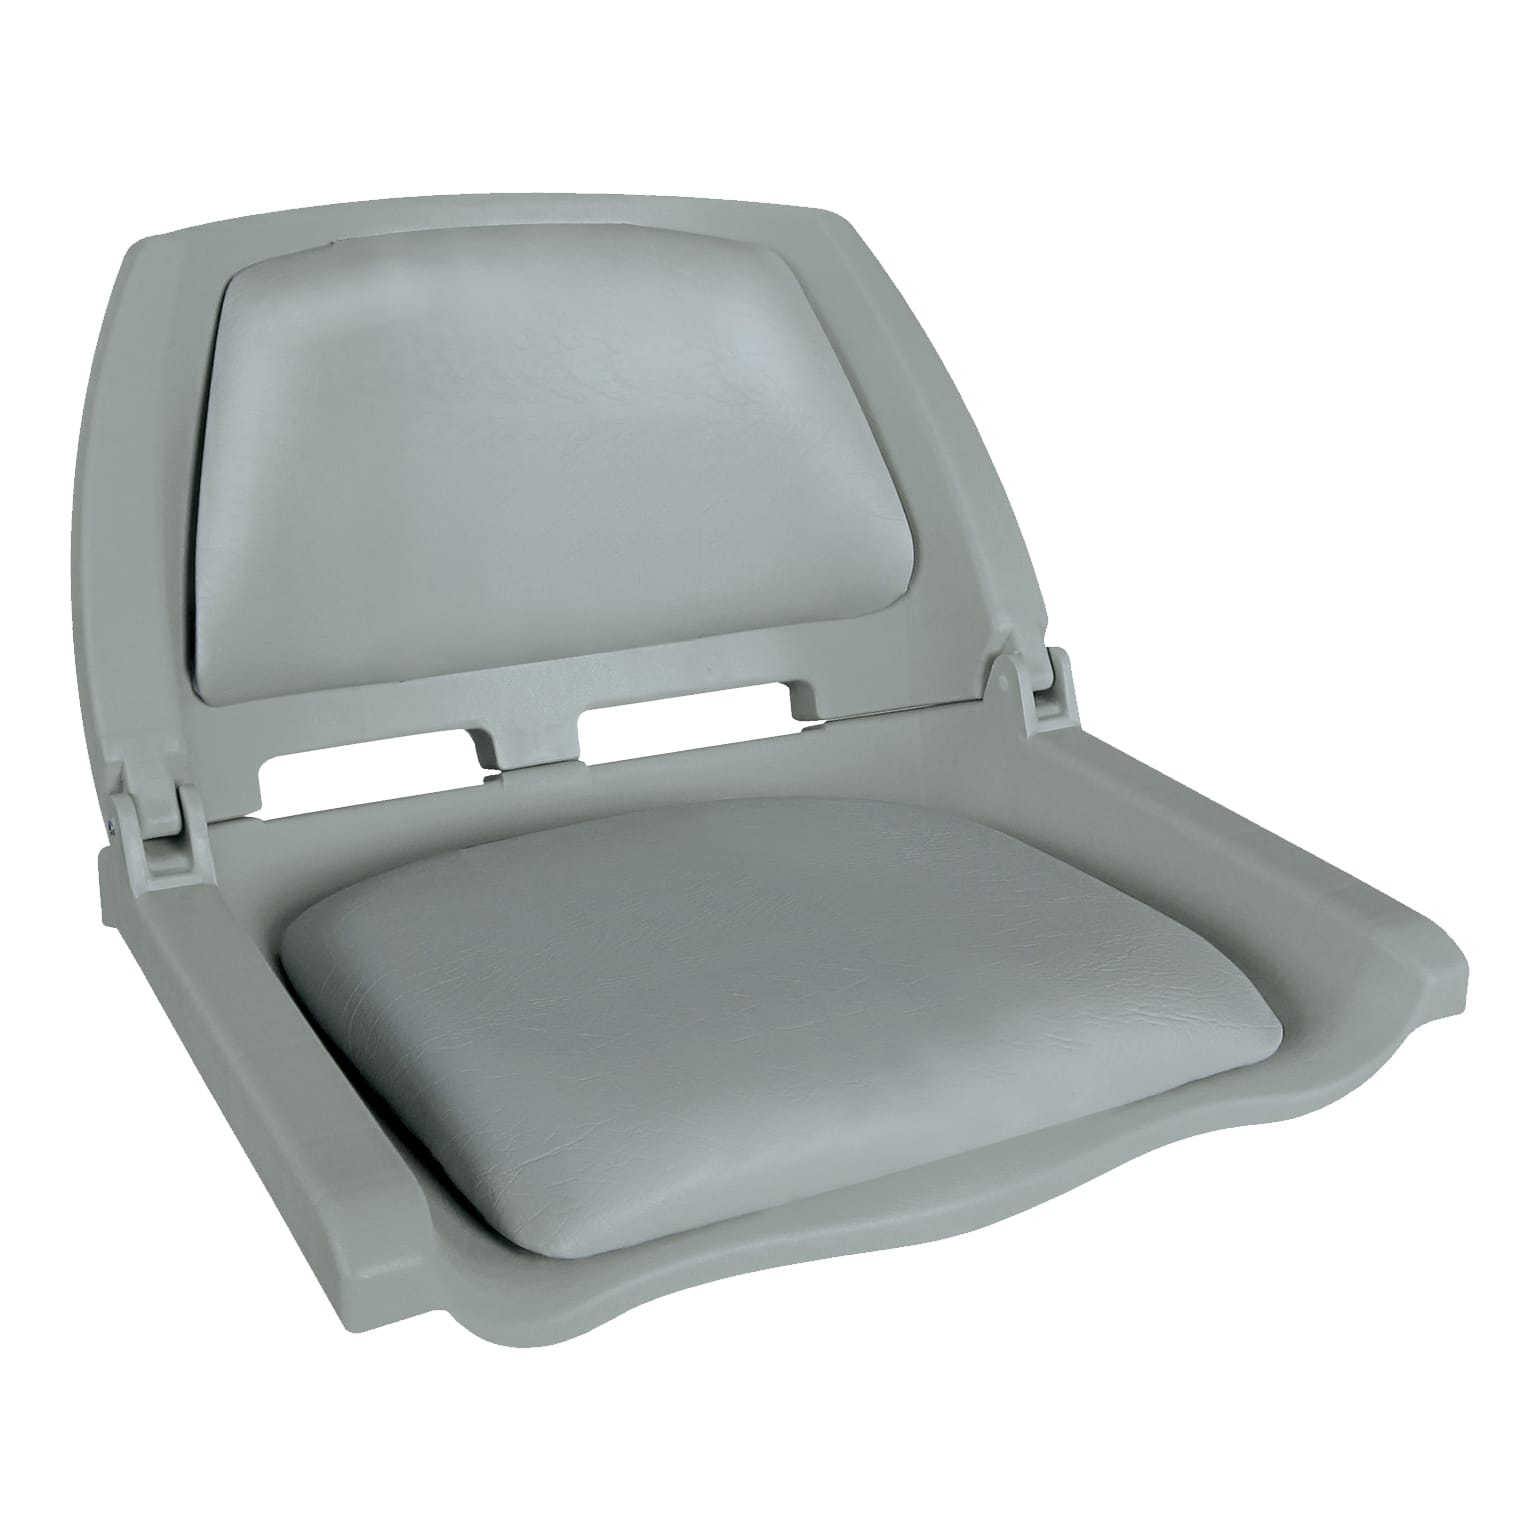 Wholesale new bass boat seats For Your Marine Activities 